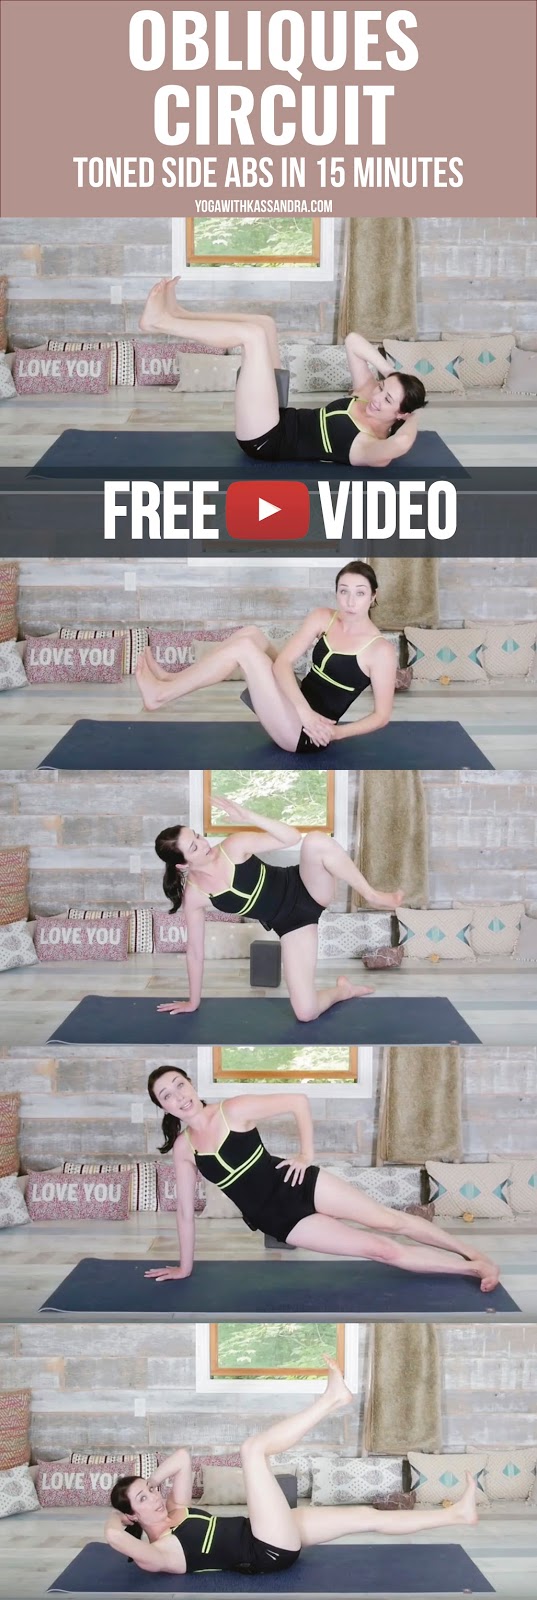 When targeting one area of the body in a workout, it doesn't require much time at once, but rather the right moves consistently.   These 5 moves make up a 15 minute circuit I practice regularly, to work the side abdominals or obliques. Doing this alongside my yoga practice provides me with strength and stability in the core to get in to new (and impressive) yoga poses.   Each of these exercises will be done in 12 repetitions on each side. Feel free to take breaks as needed, no one is timing how fast you get it done.   You will need one block for this short and sweet workout, and I would also suggest a yoga mat for comfort.